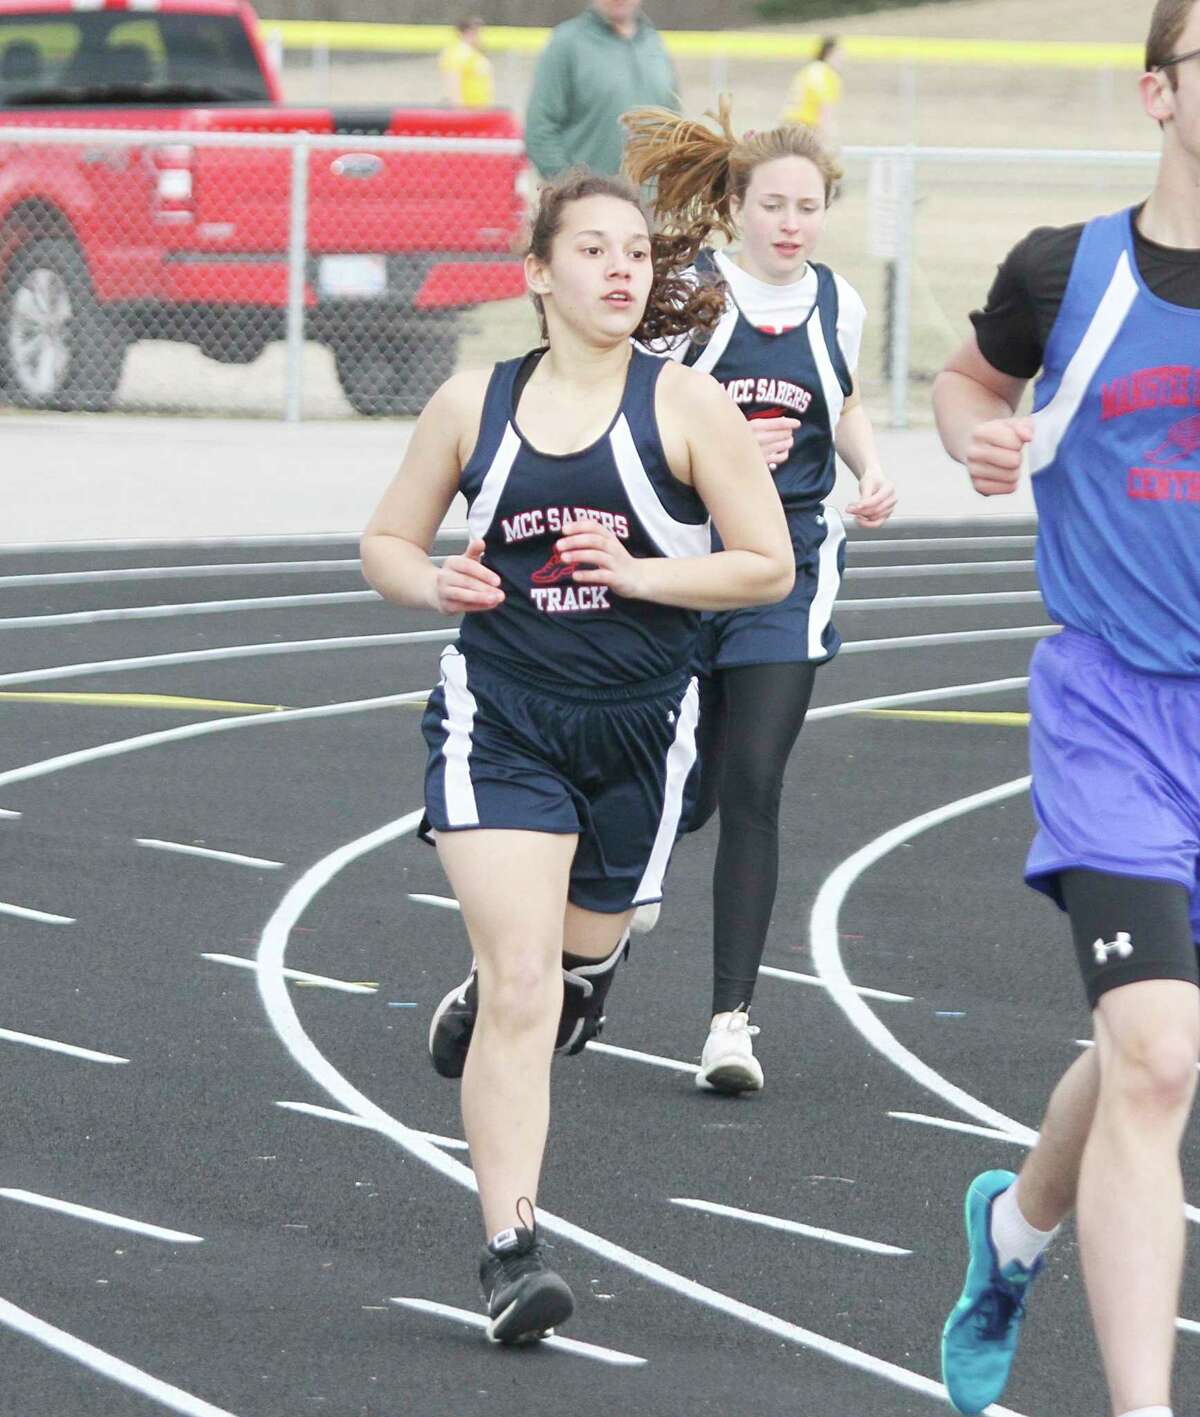 Manistee Catholic Central freshman Leah Stickney had hopes of defending her West Michigan D League crown in the 800-meter run this season. (News Advocate file photo)